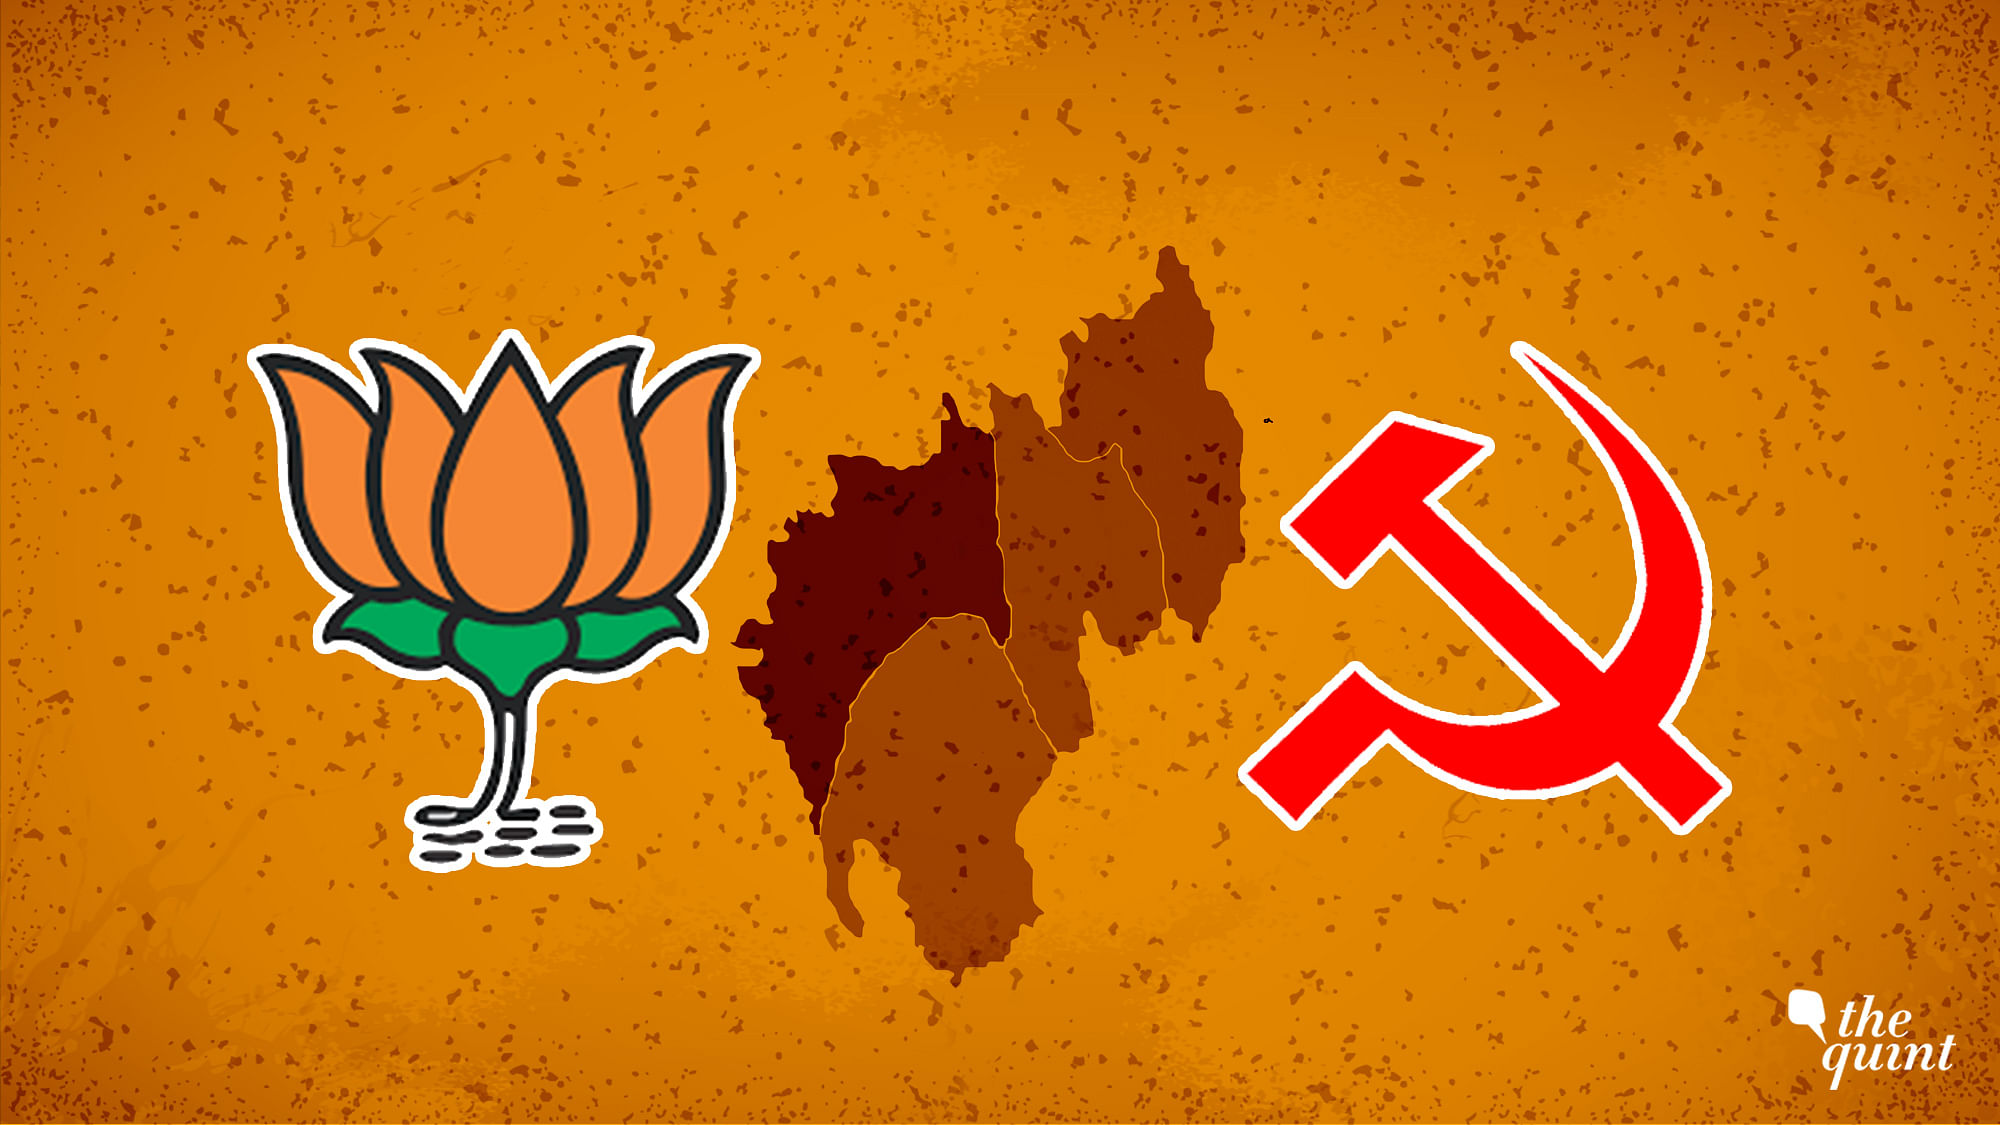 BJP to form the next government in Tripura, displacing the 25-year-old Left front government in the state.&nbsp;